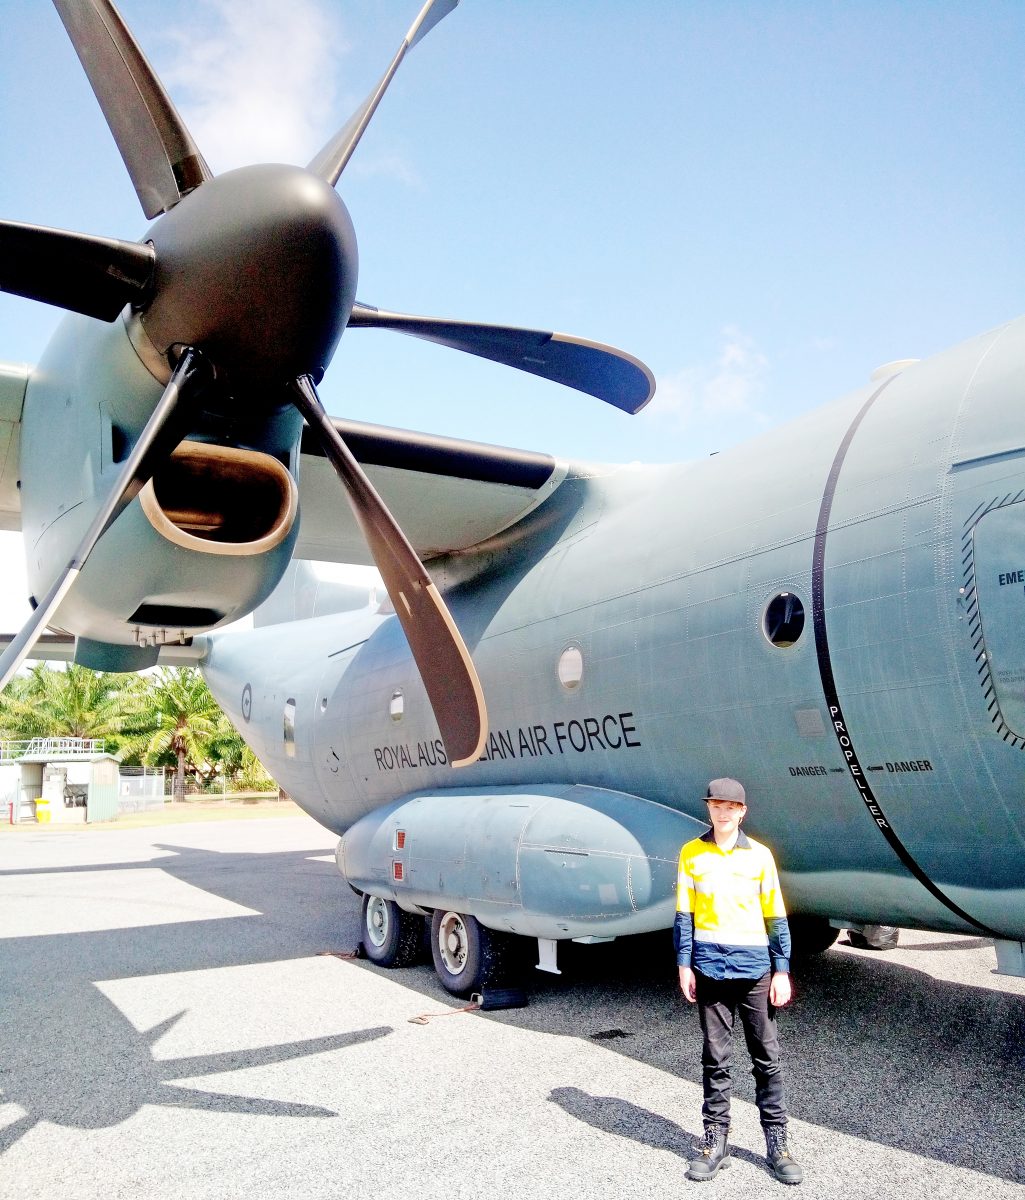 Maeve McCollum got to tour a RAAF Spartan during her work experience with Cook Shire Council.